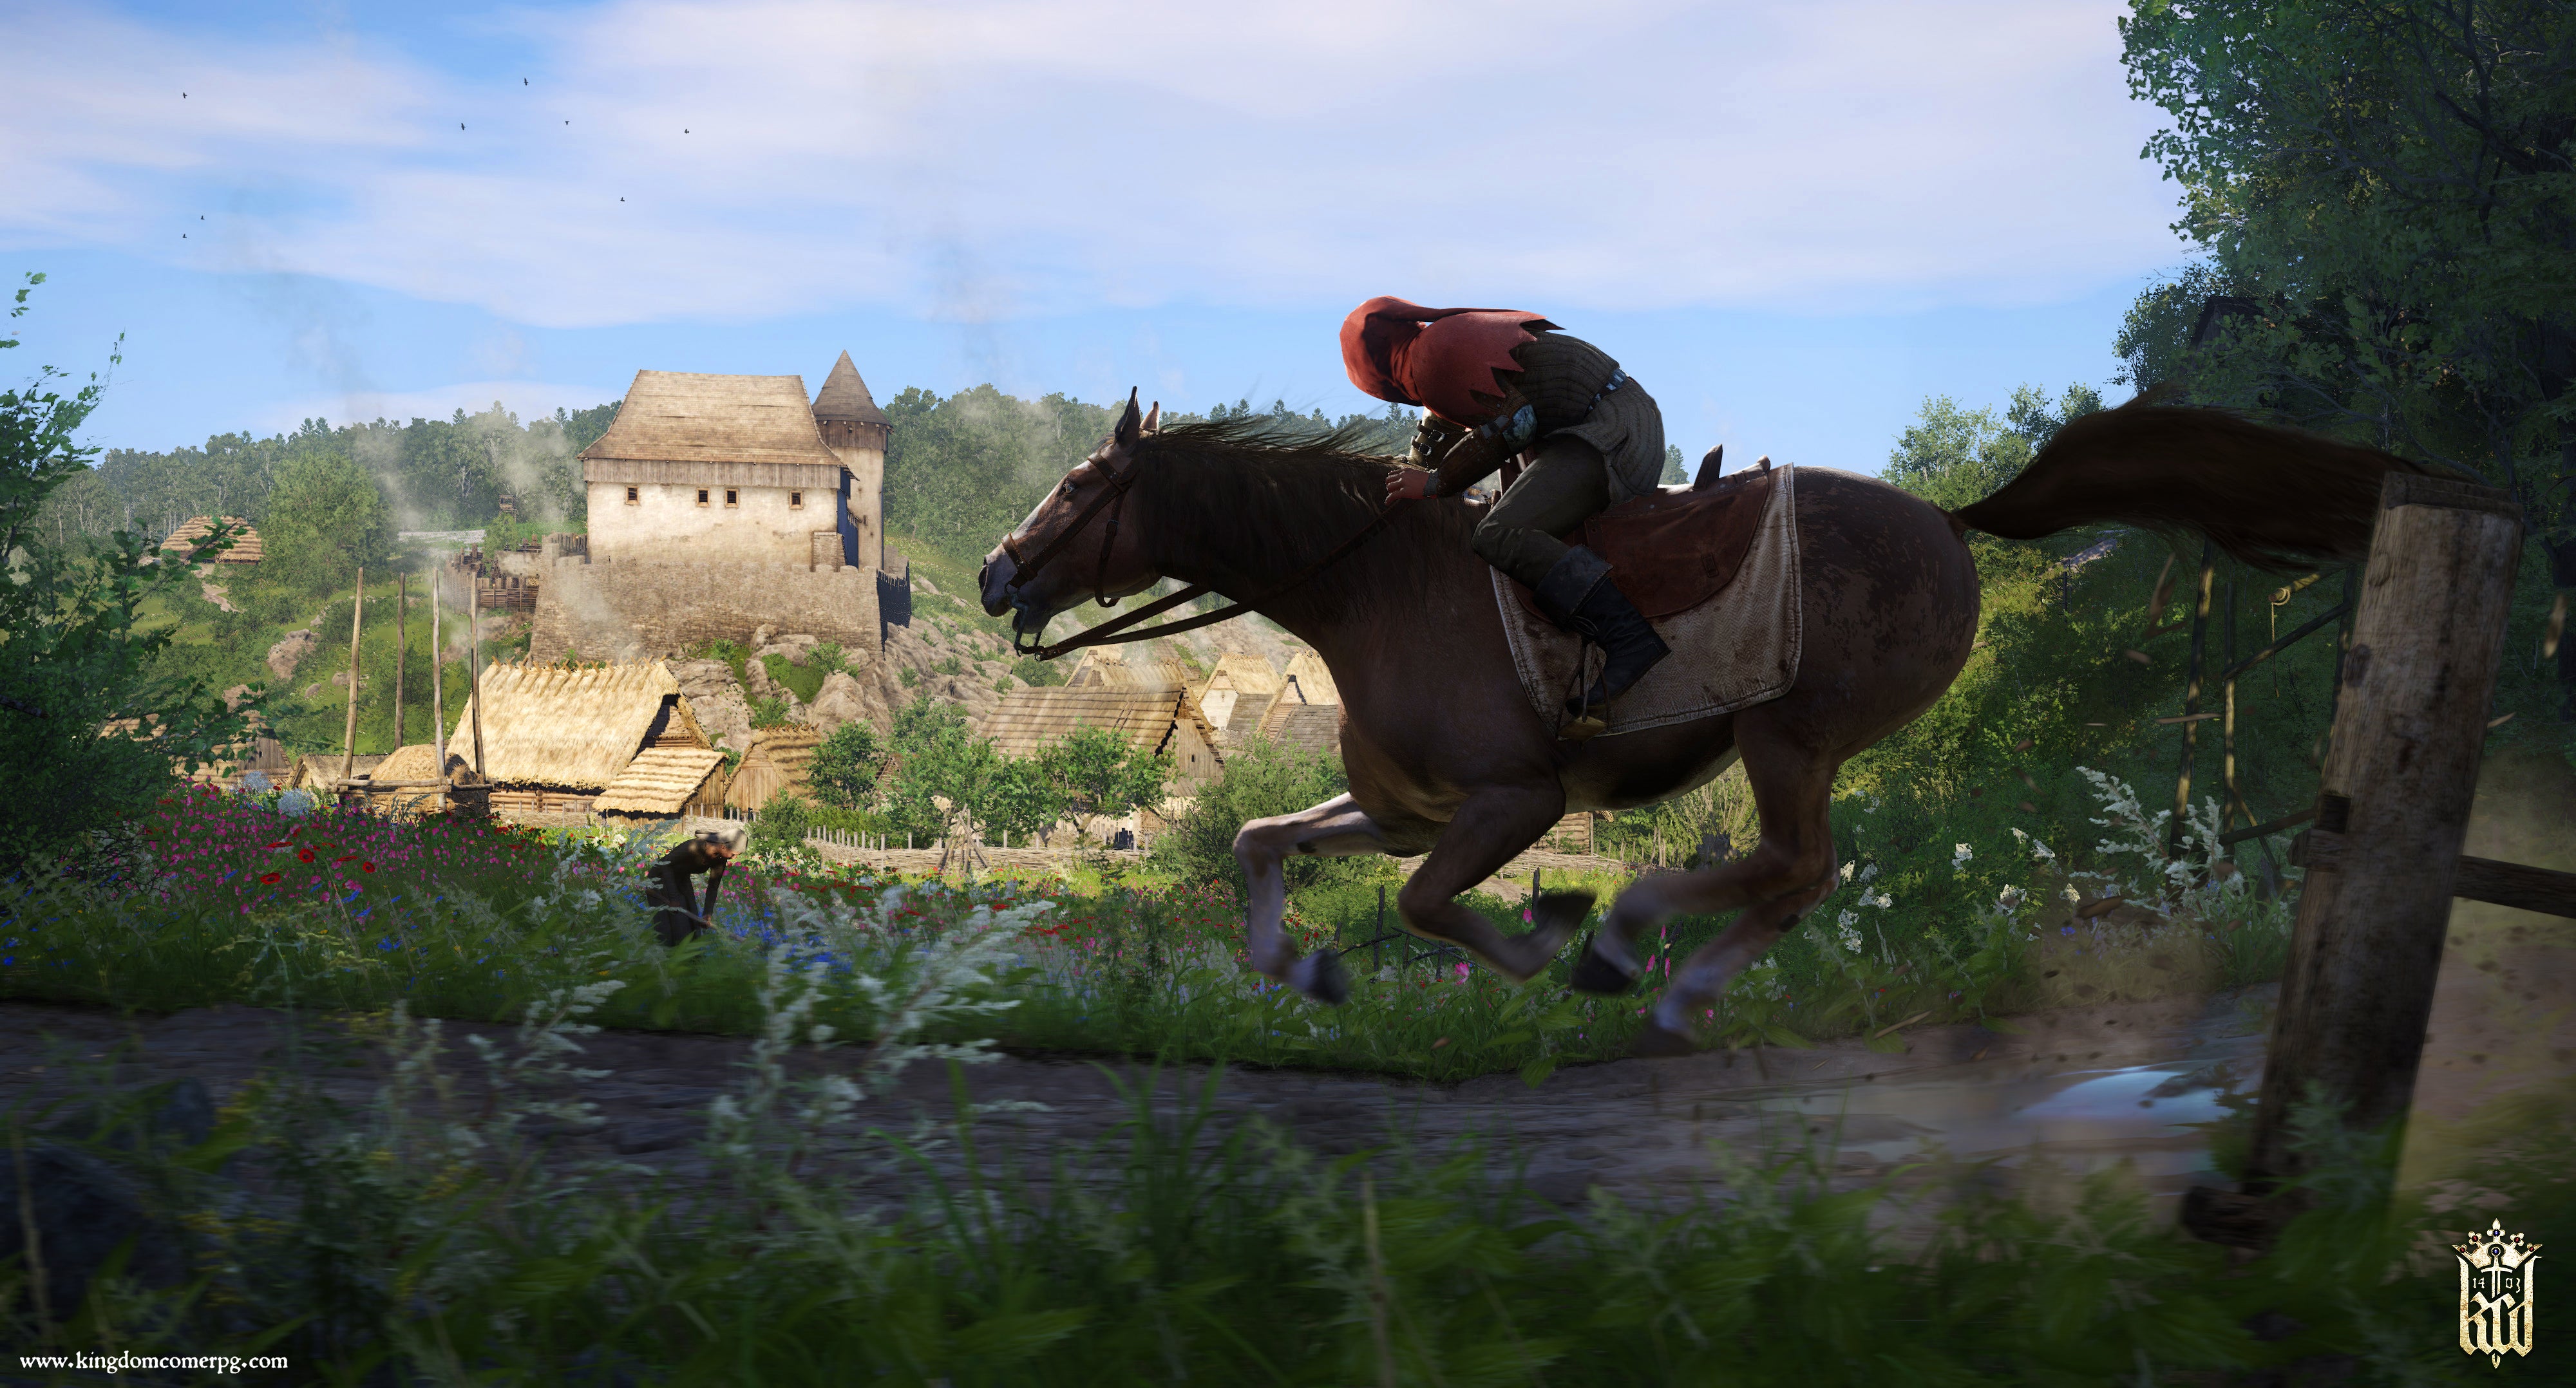 Image for Kingdom Come Deliverance suffers from poor performance across all consoles, even if Xbox One X has resolution advantage - report